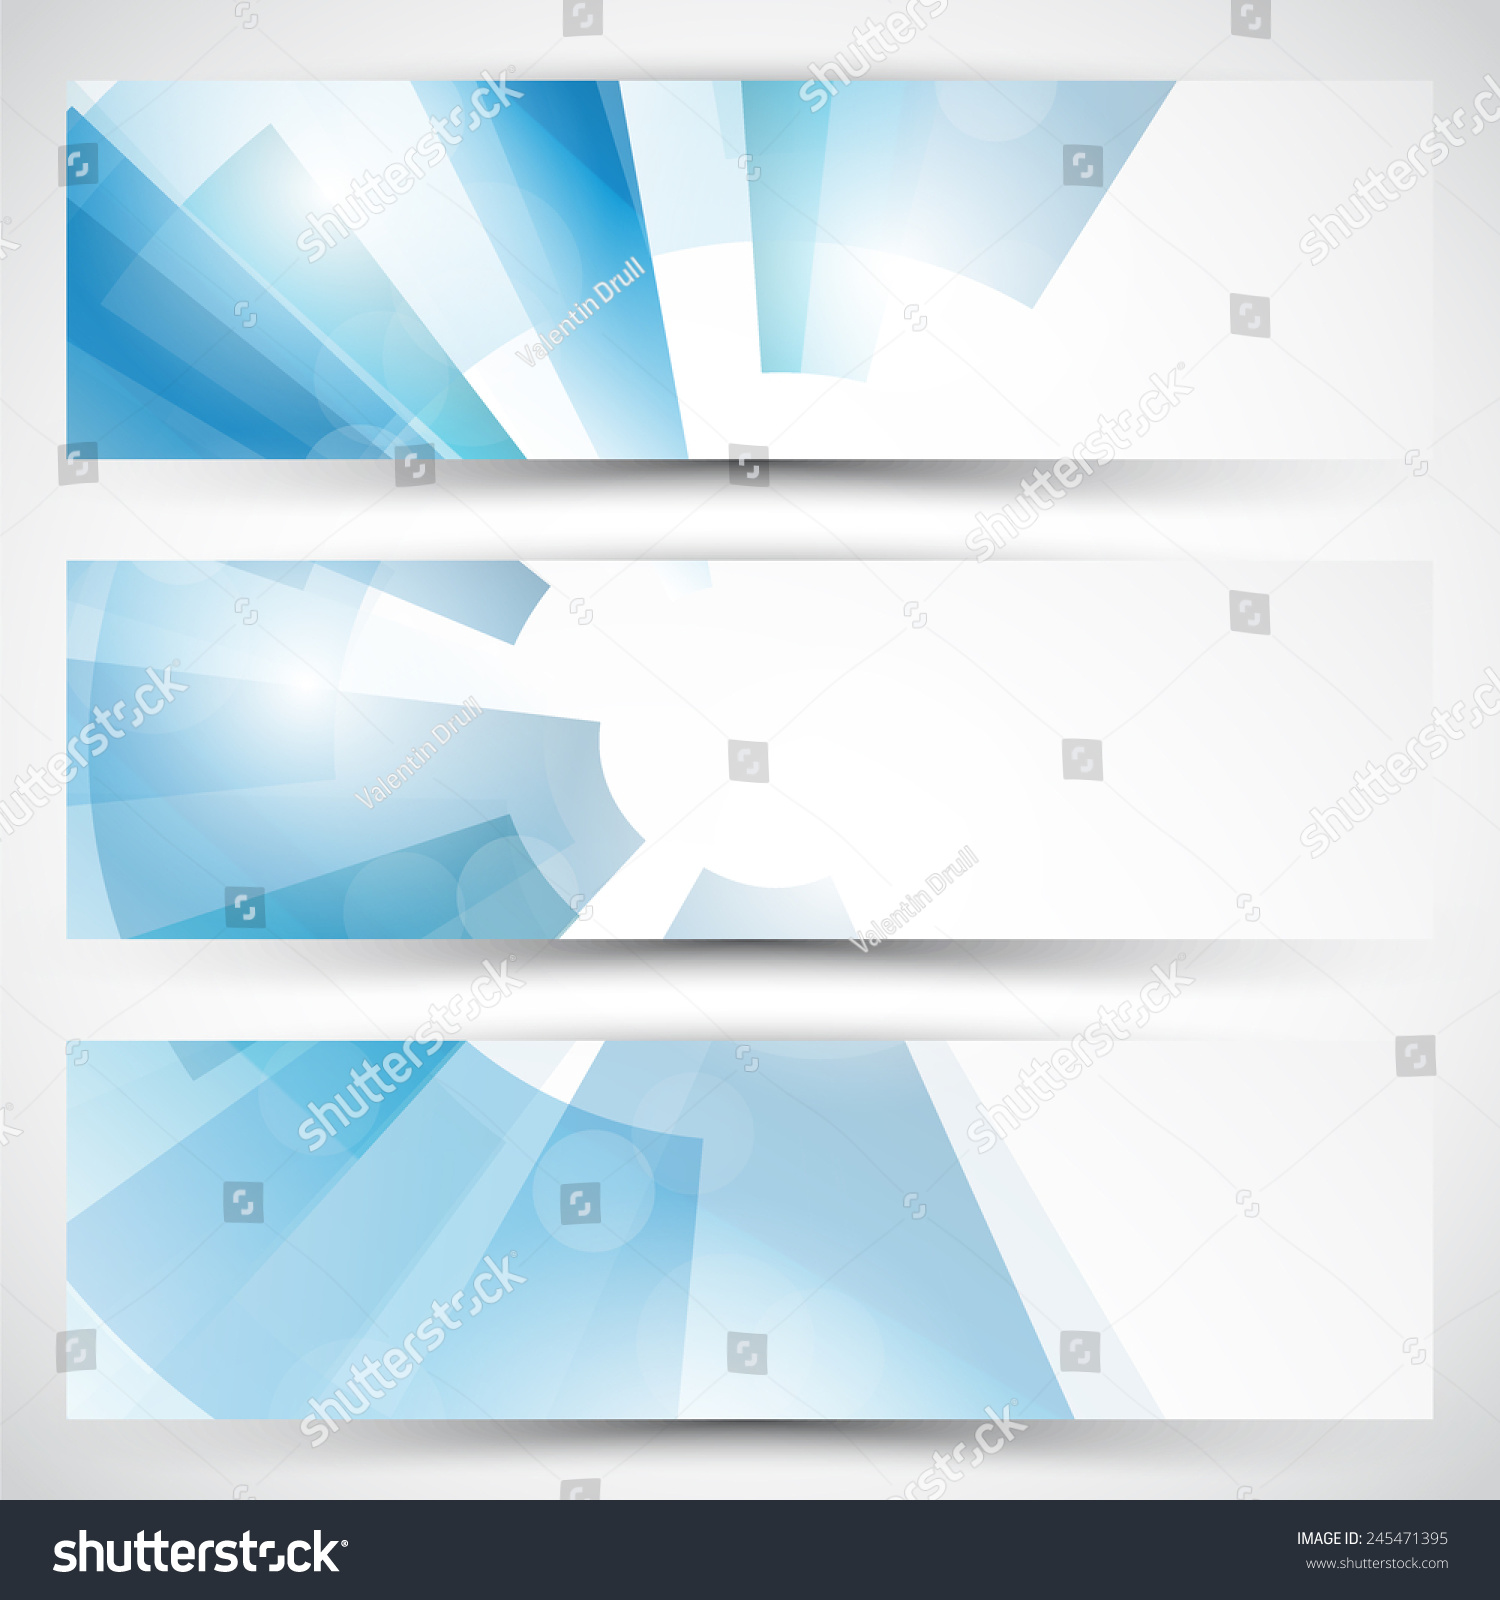 Vector Abstract Banner Background. Eps 10 Vector Illustration